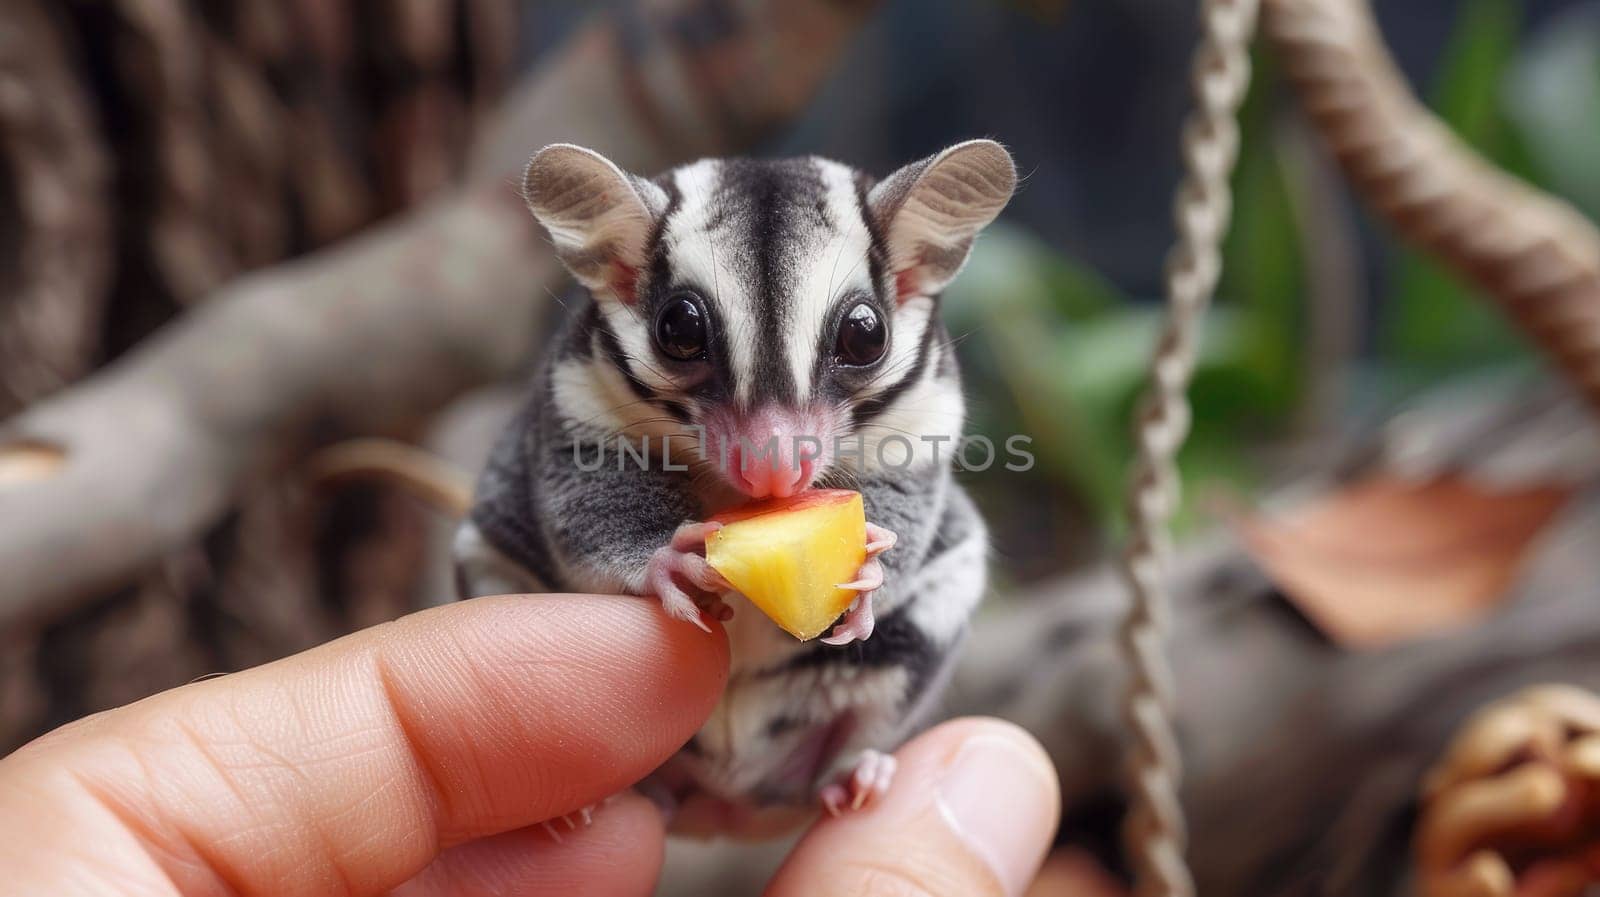 A close-up shot of a sugar glider perched on a finger, its tiny hands gripping a piece of fruit